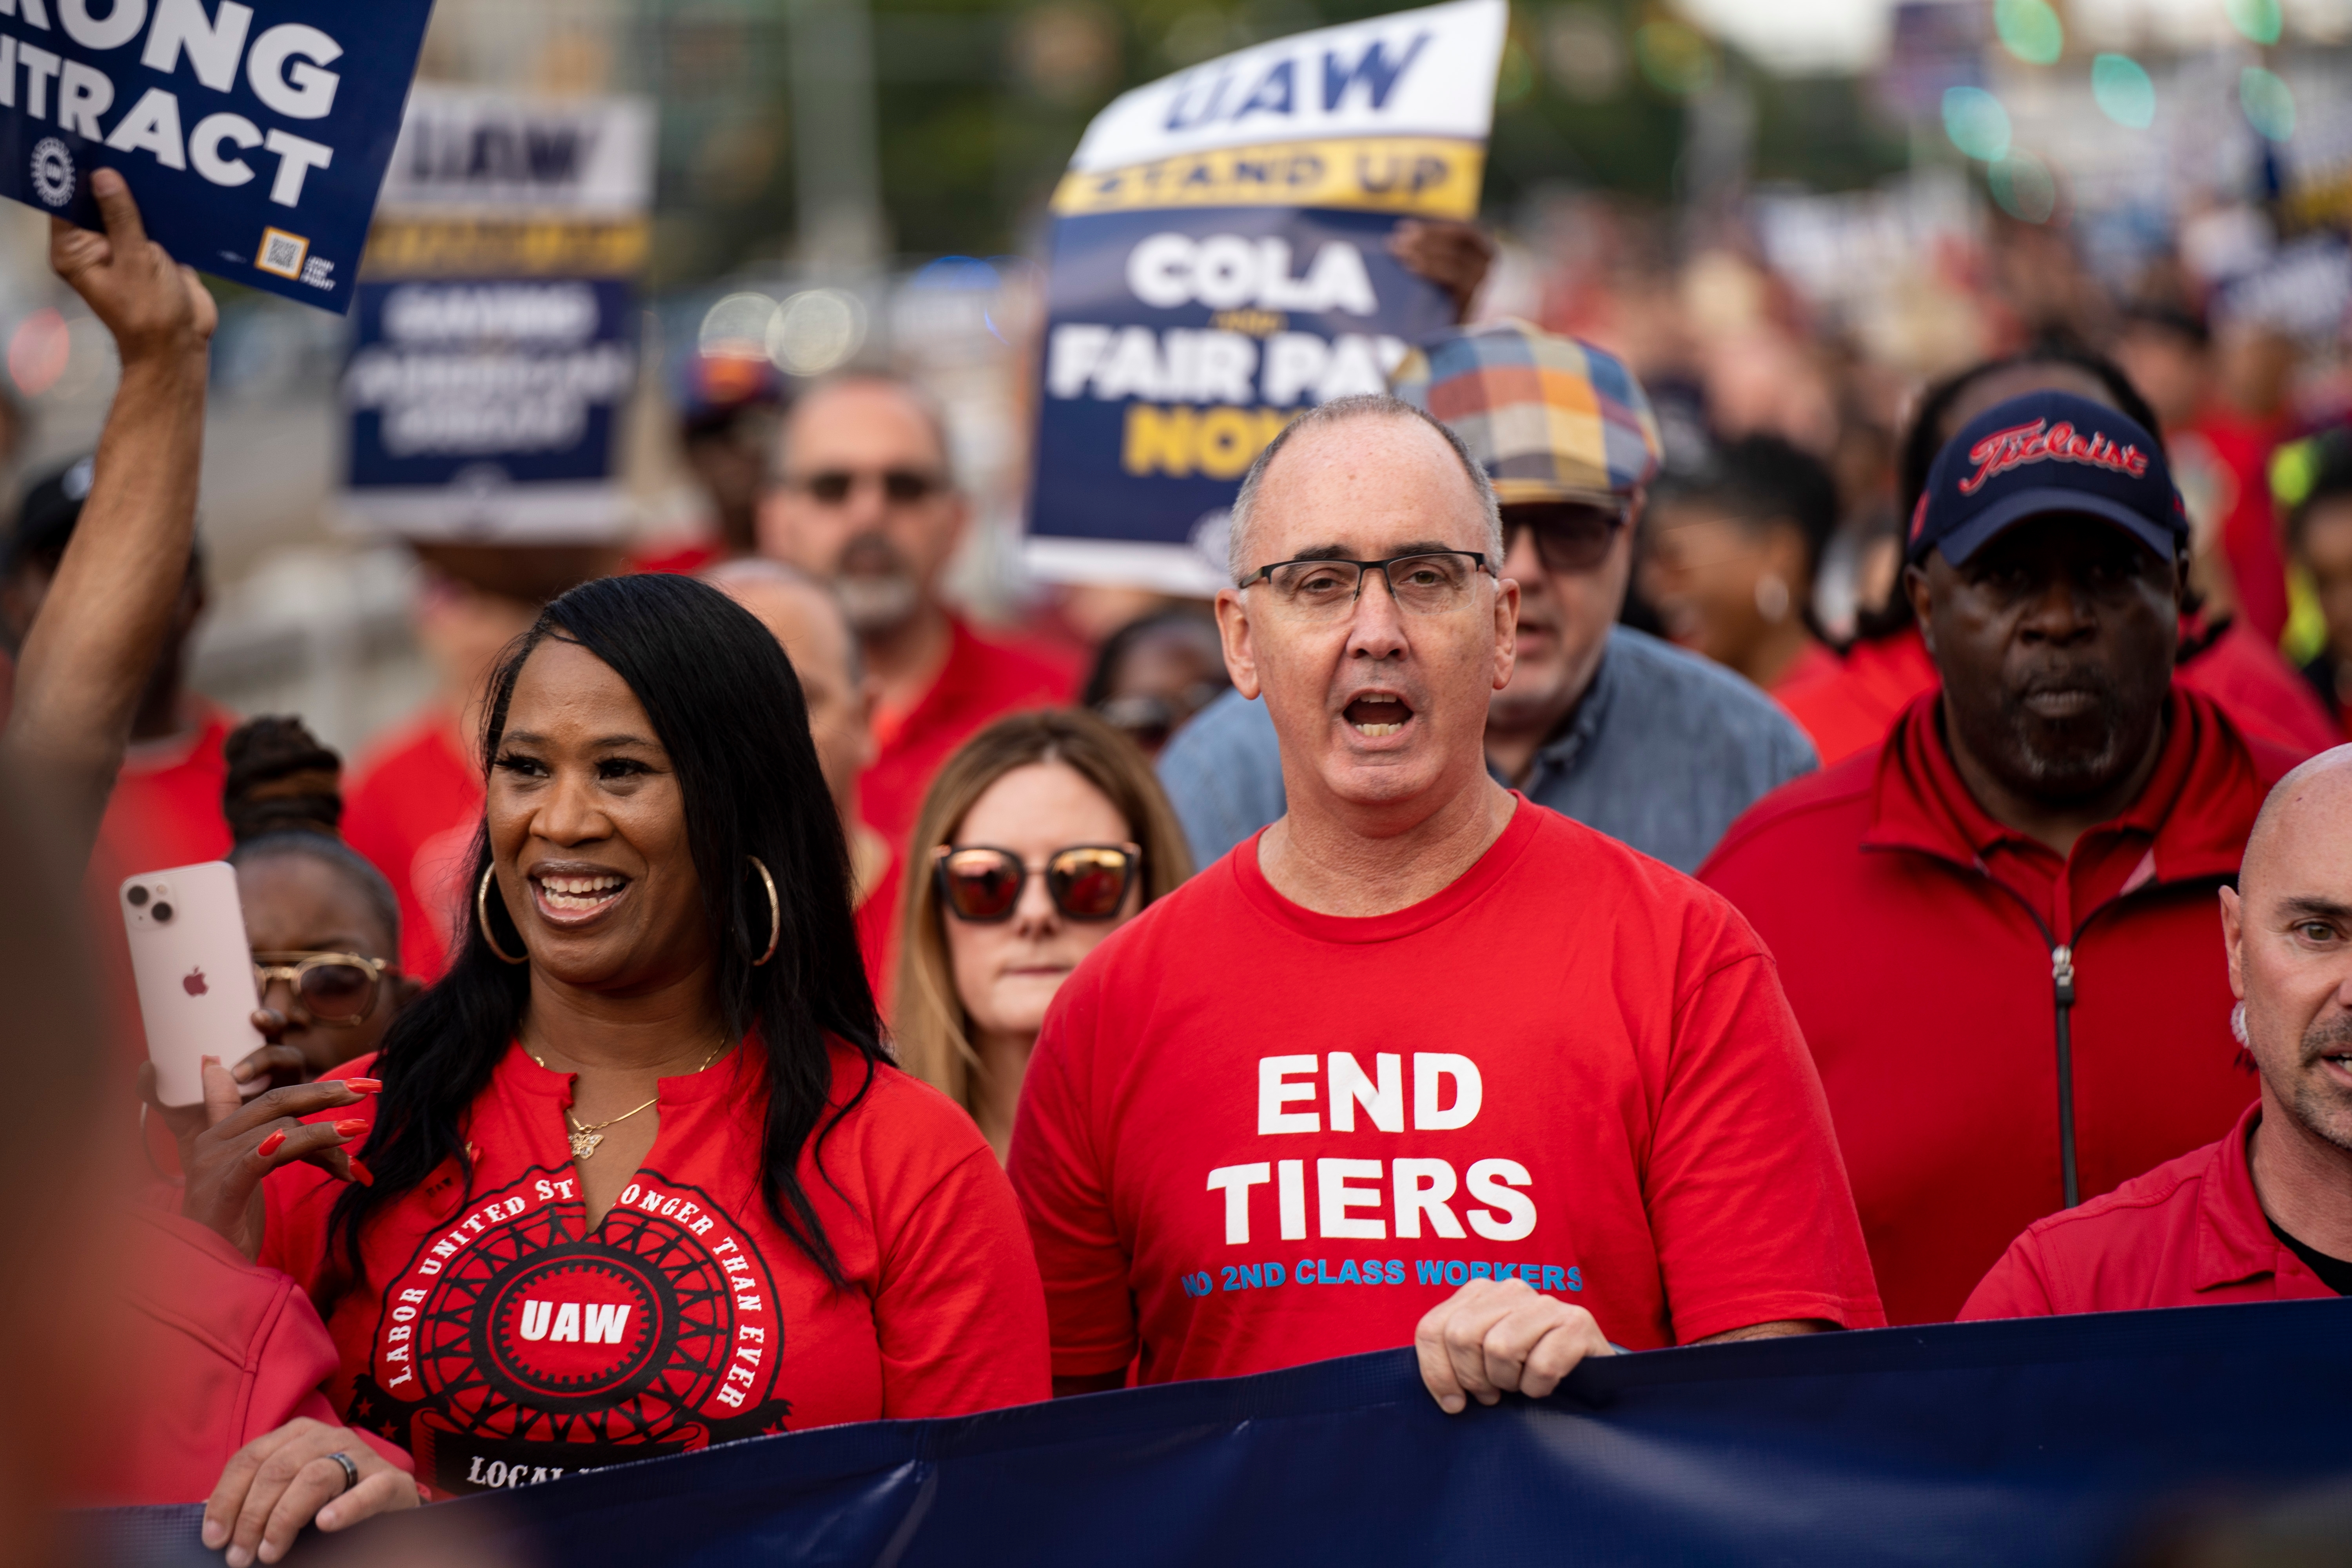 Photo: UAW president leading a march in the 2023 strike and collective bargaining